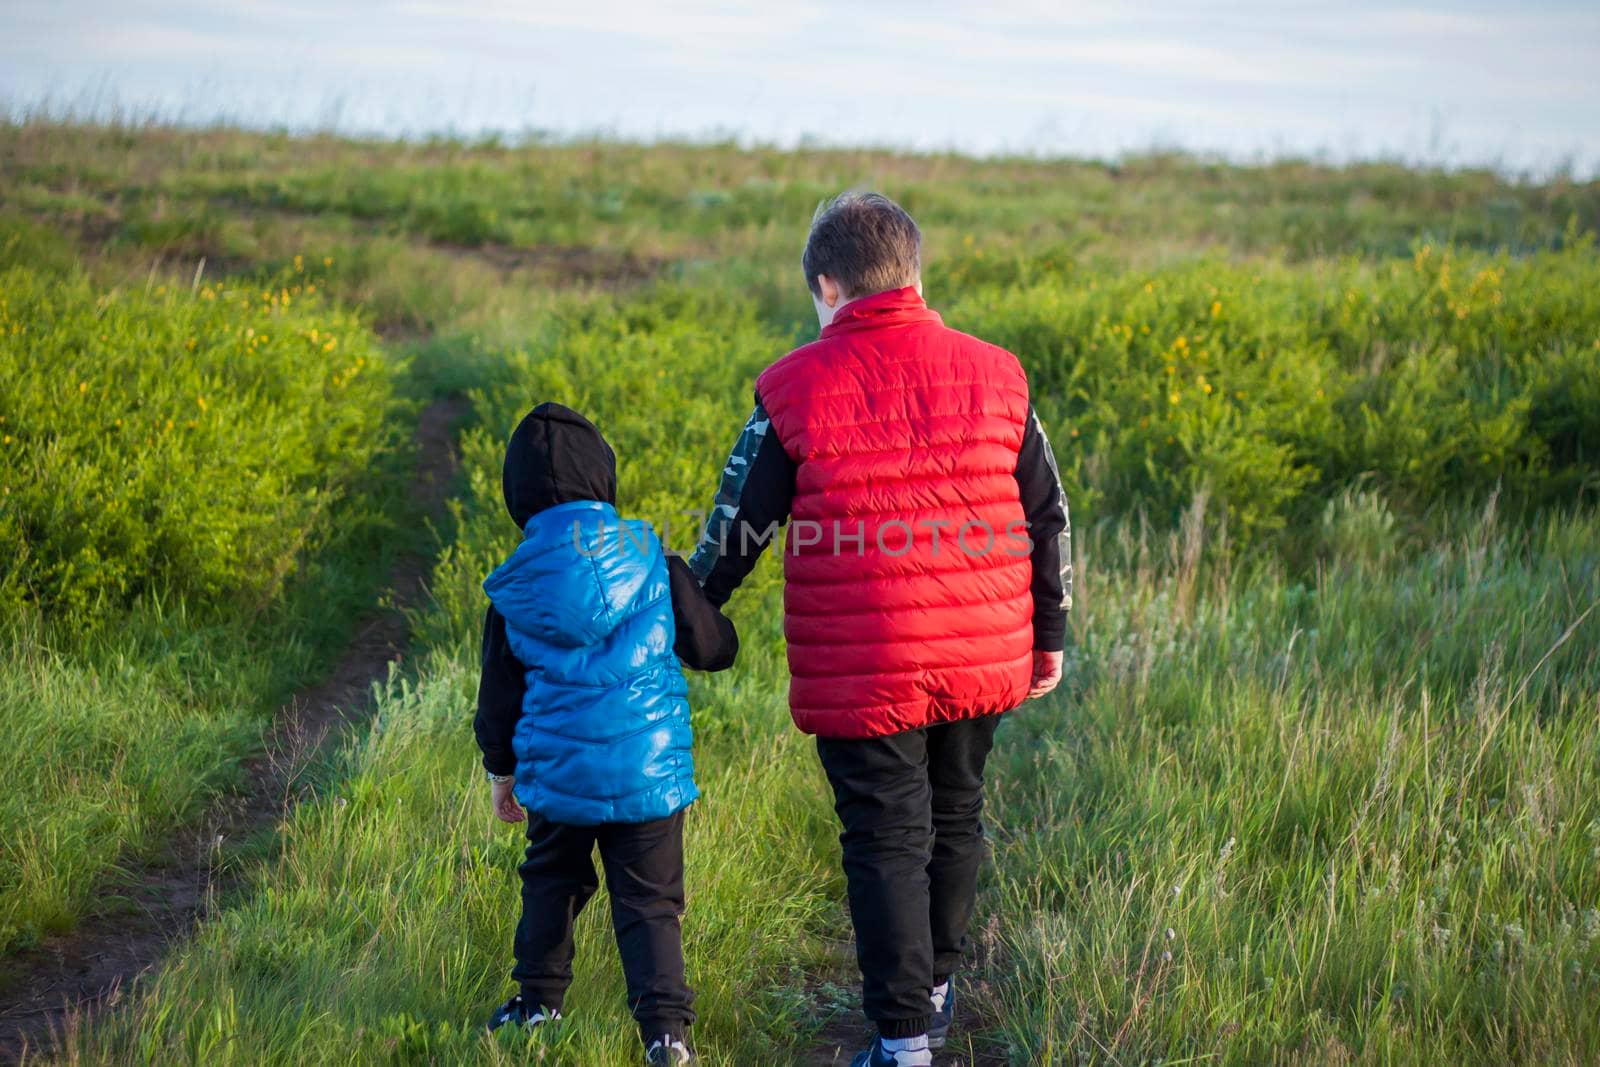 Children in the open spaces of the field are walking among the juicy spring grass in the light of sunset along a narrow trampled path. Landscape, countryside, spring